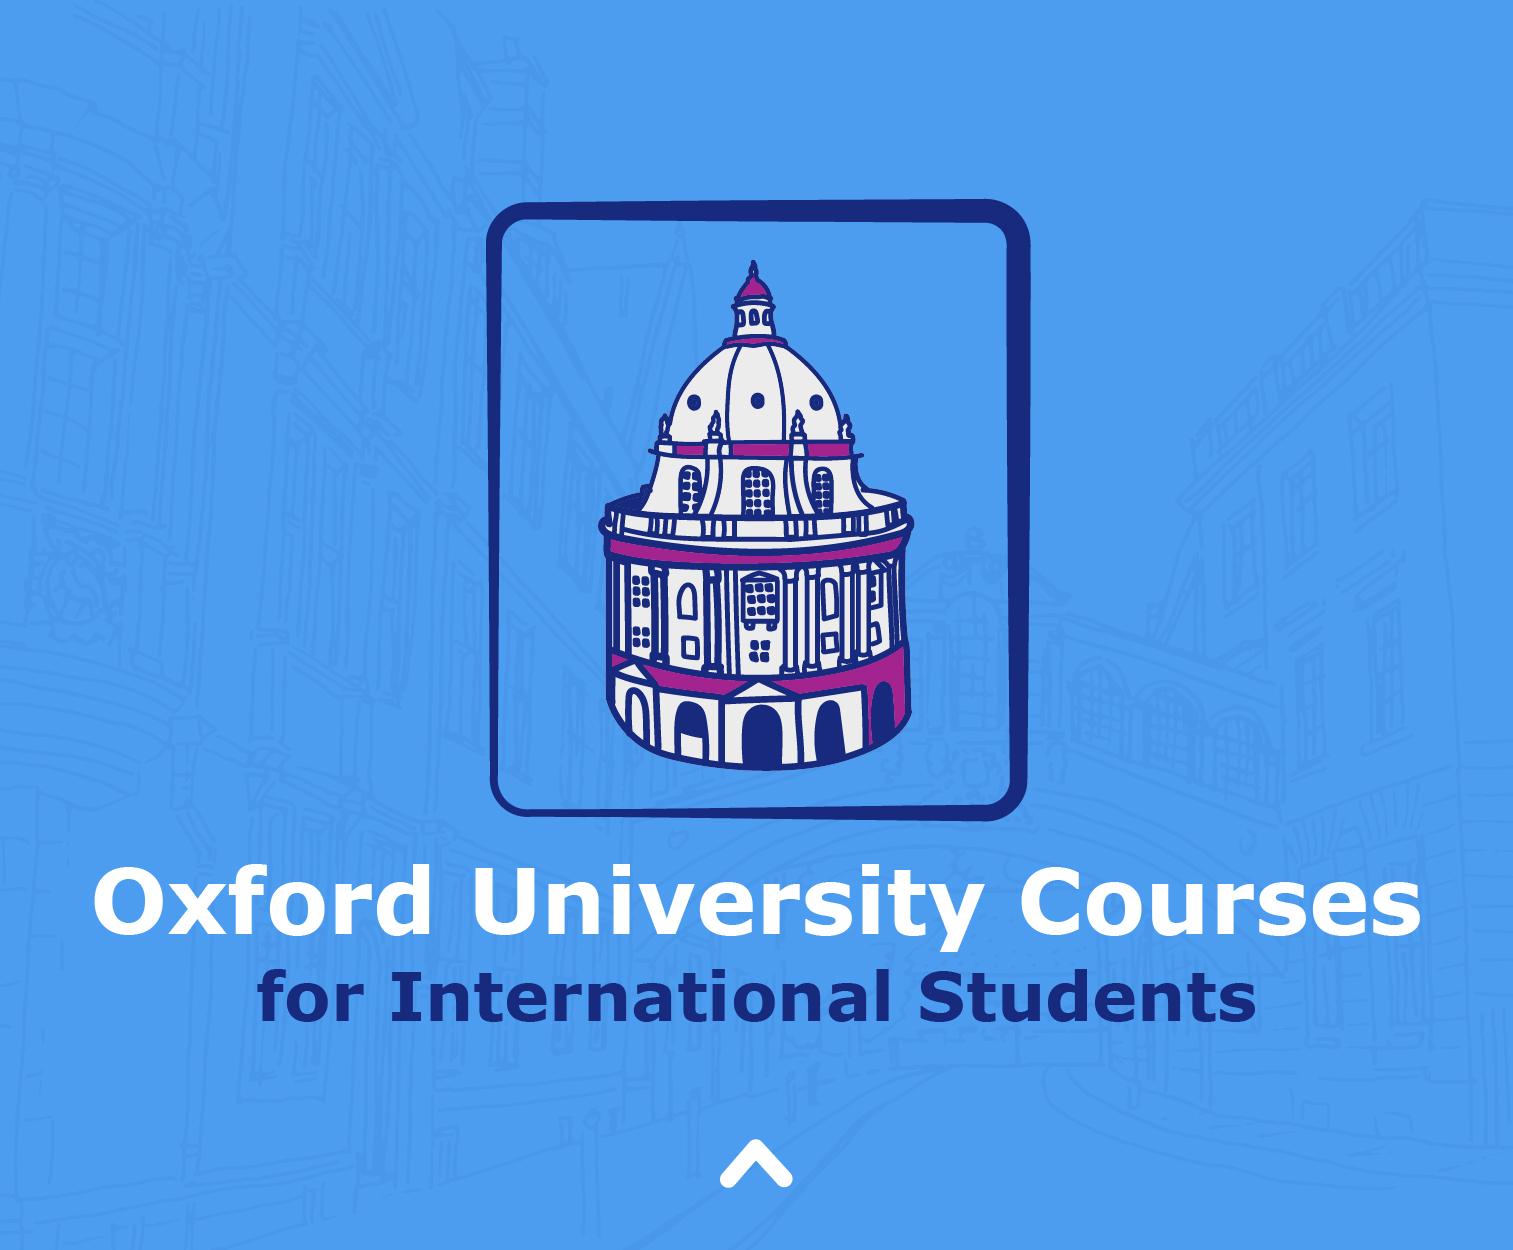 Oxford University Courses for International Students